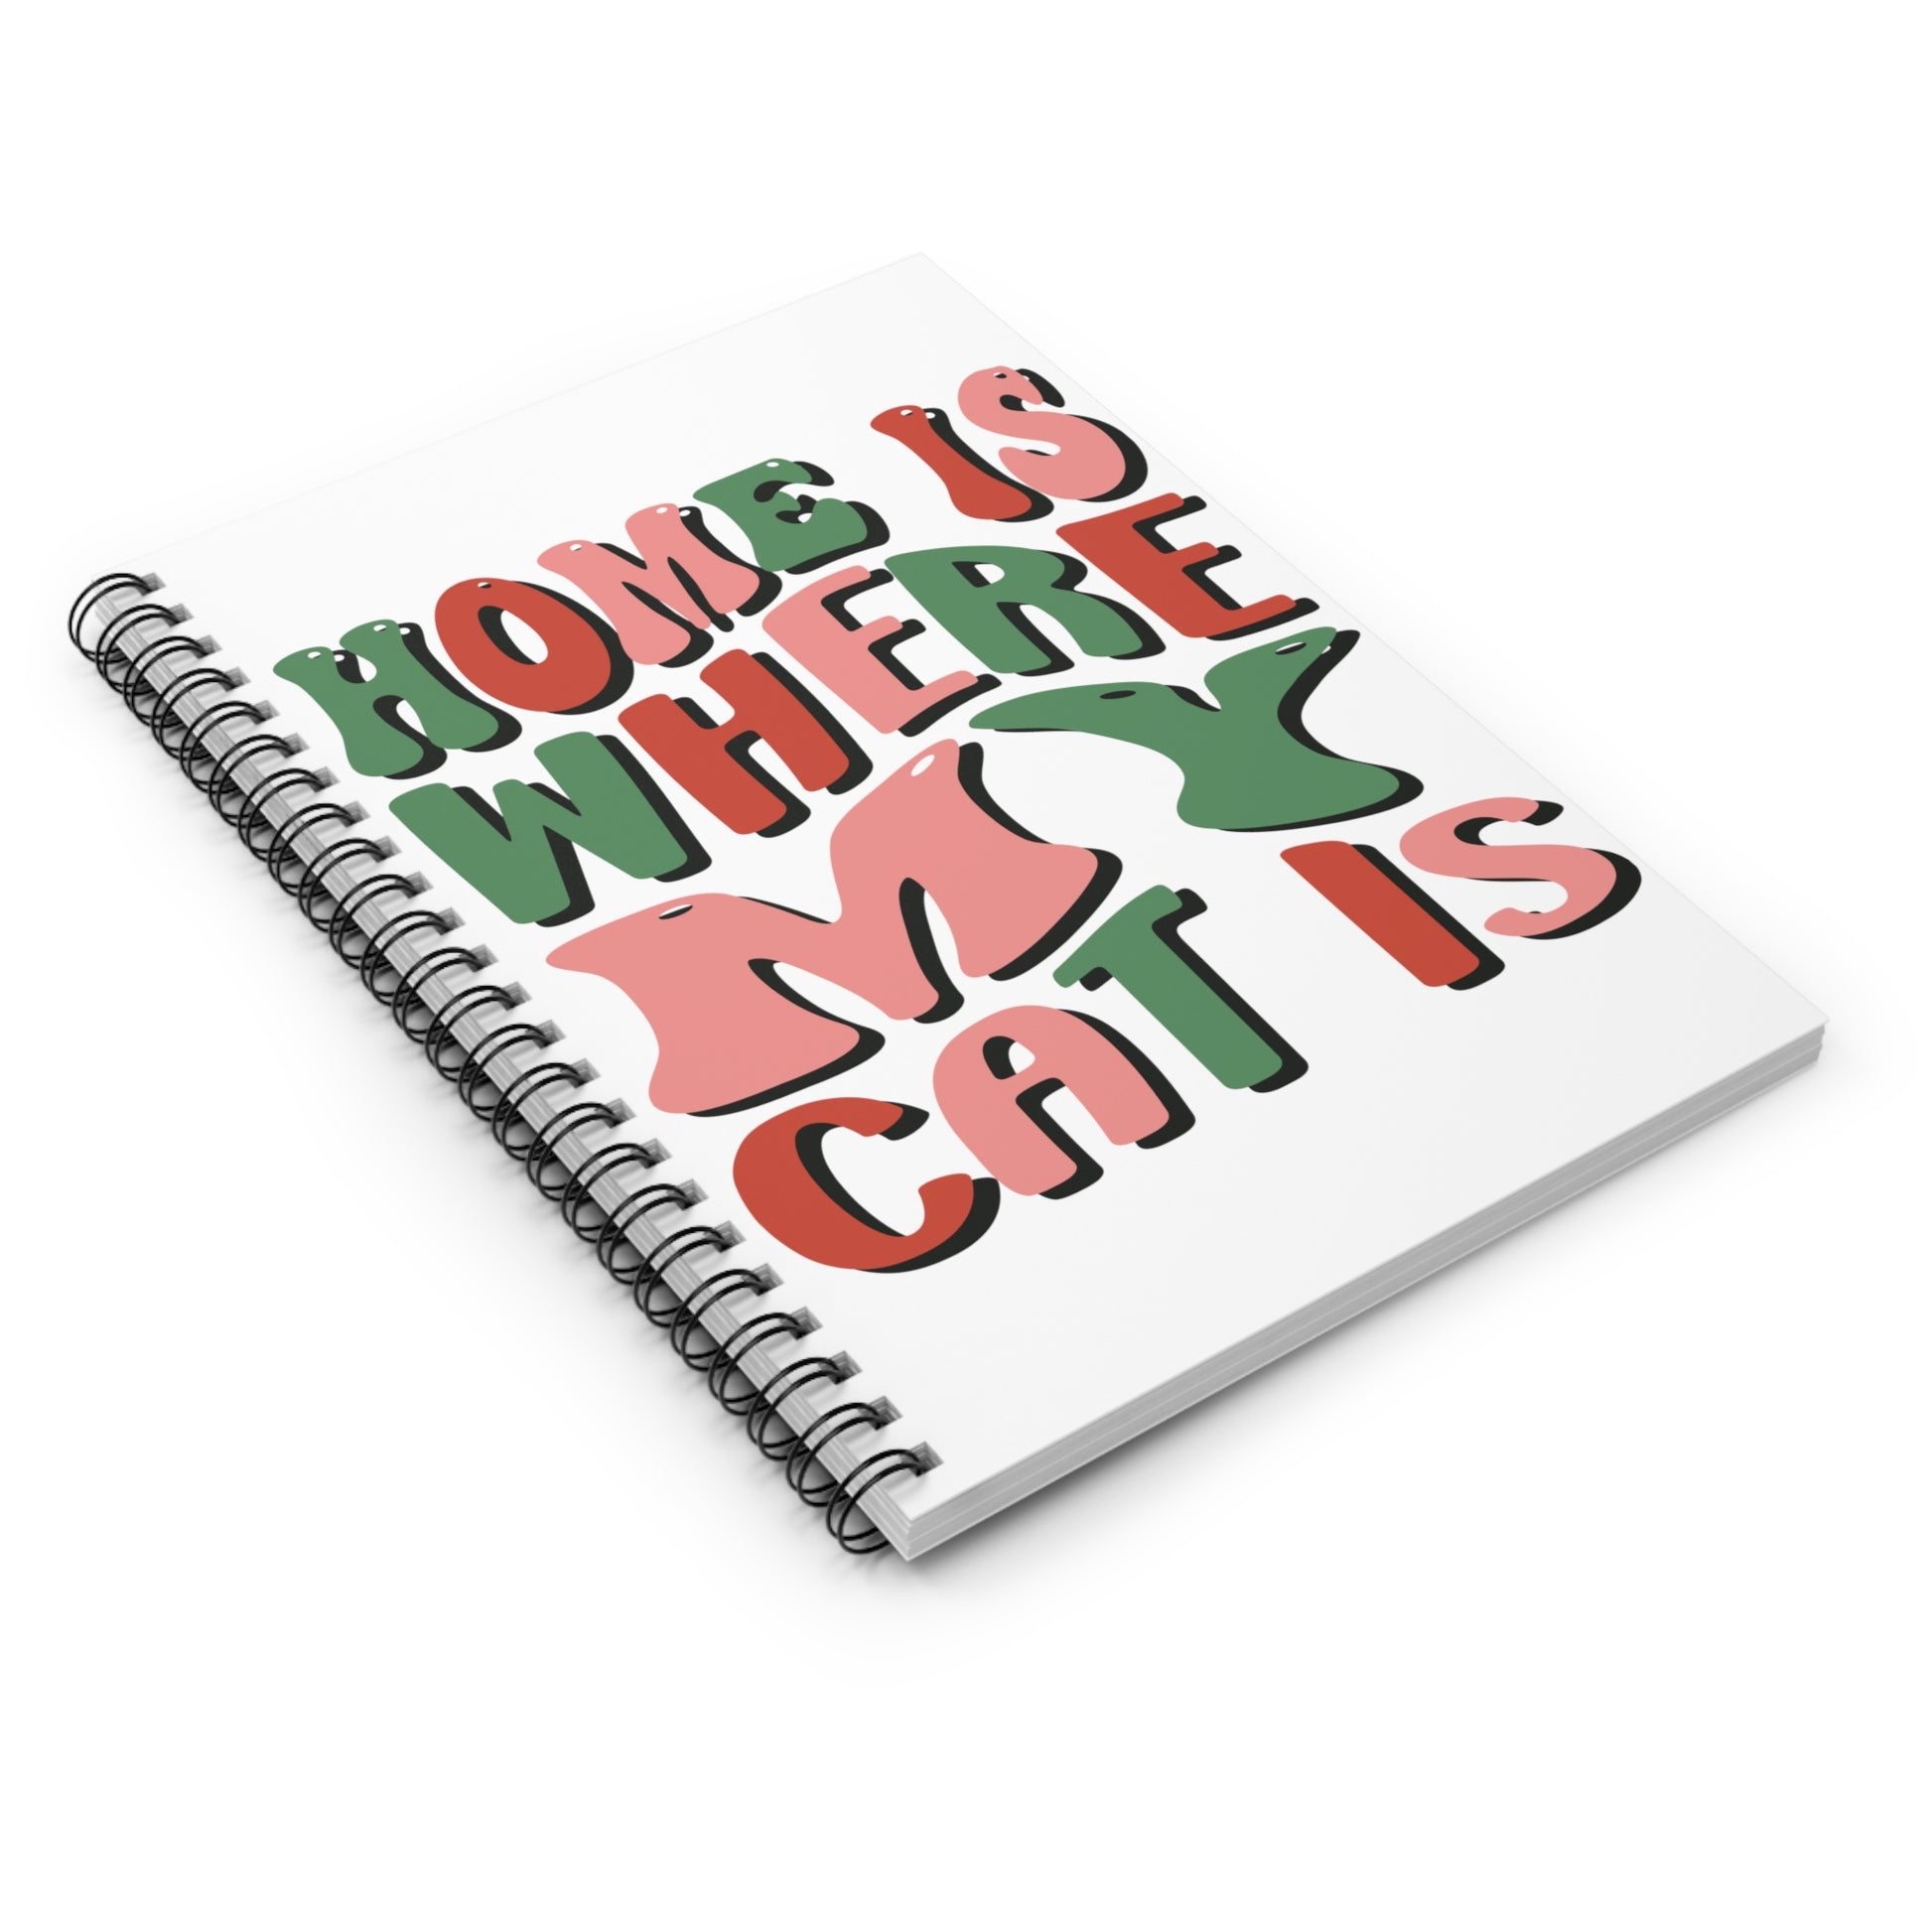 Home is Where My Cat: Spiral Notebook - Log Books - Journals - Diaries - and More Custom Printed by TheGlassyLass